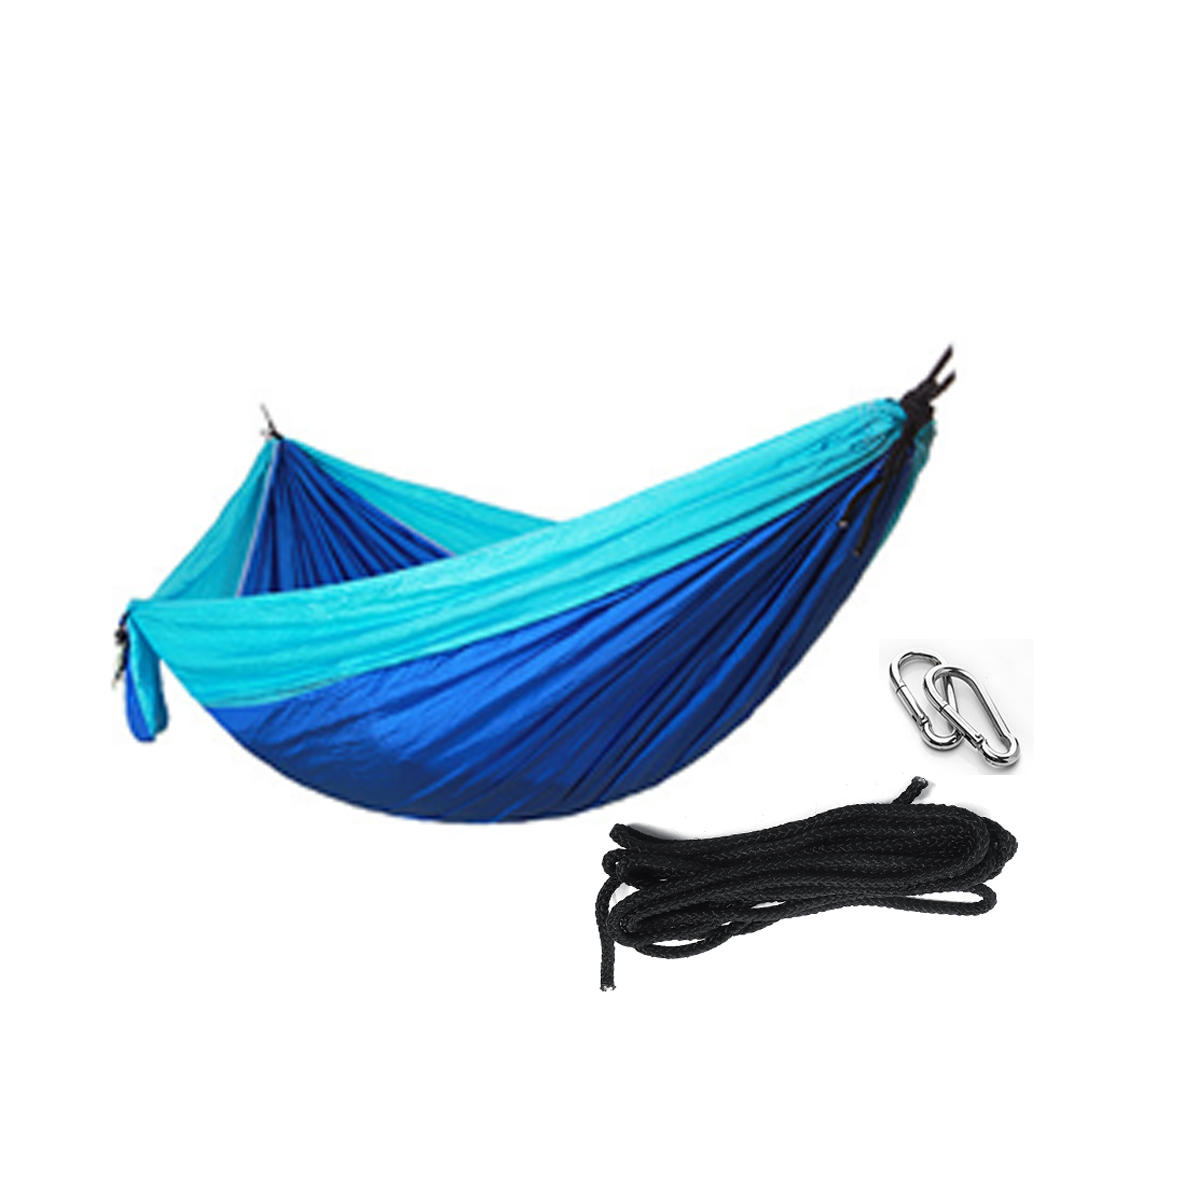 Outdoor Travel Double Person Hanging Hammock Max Load 200KG Portable Camping Hammock Bed